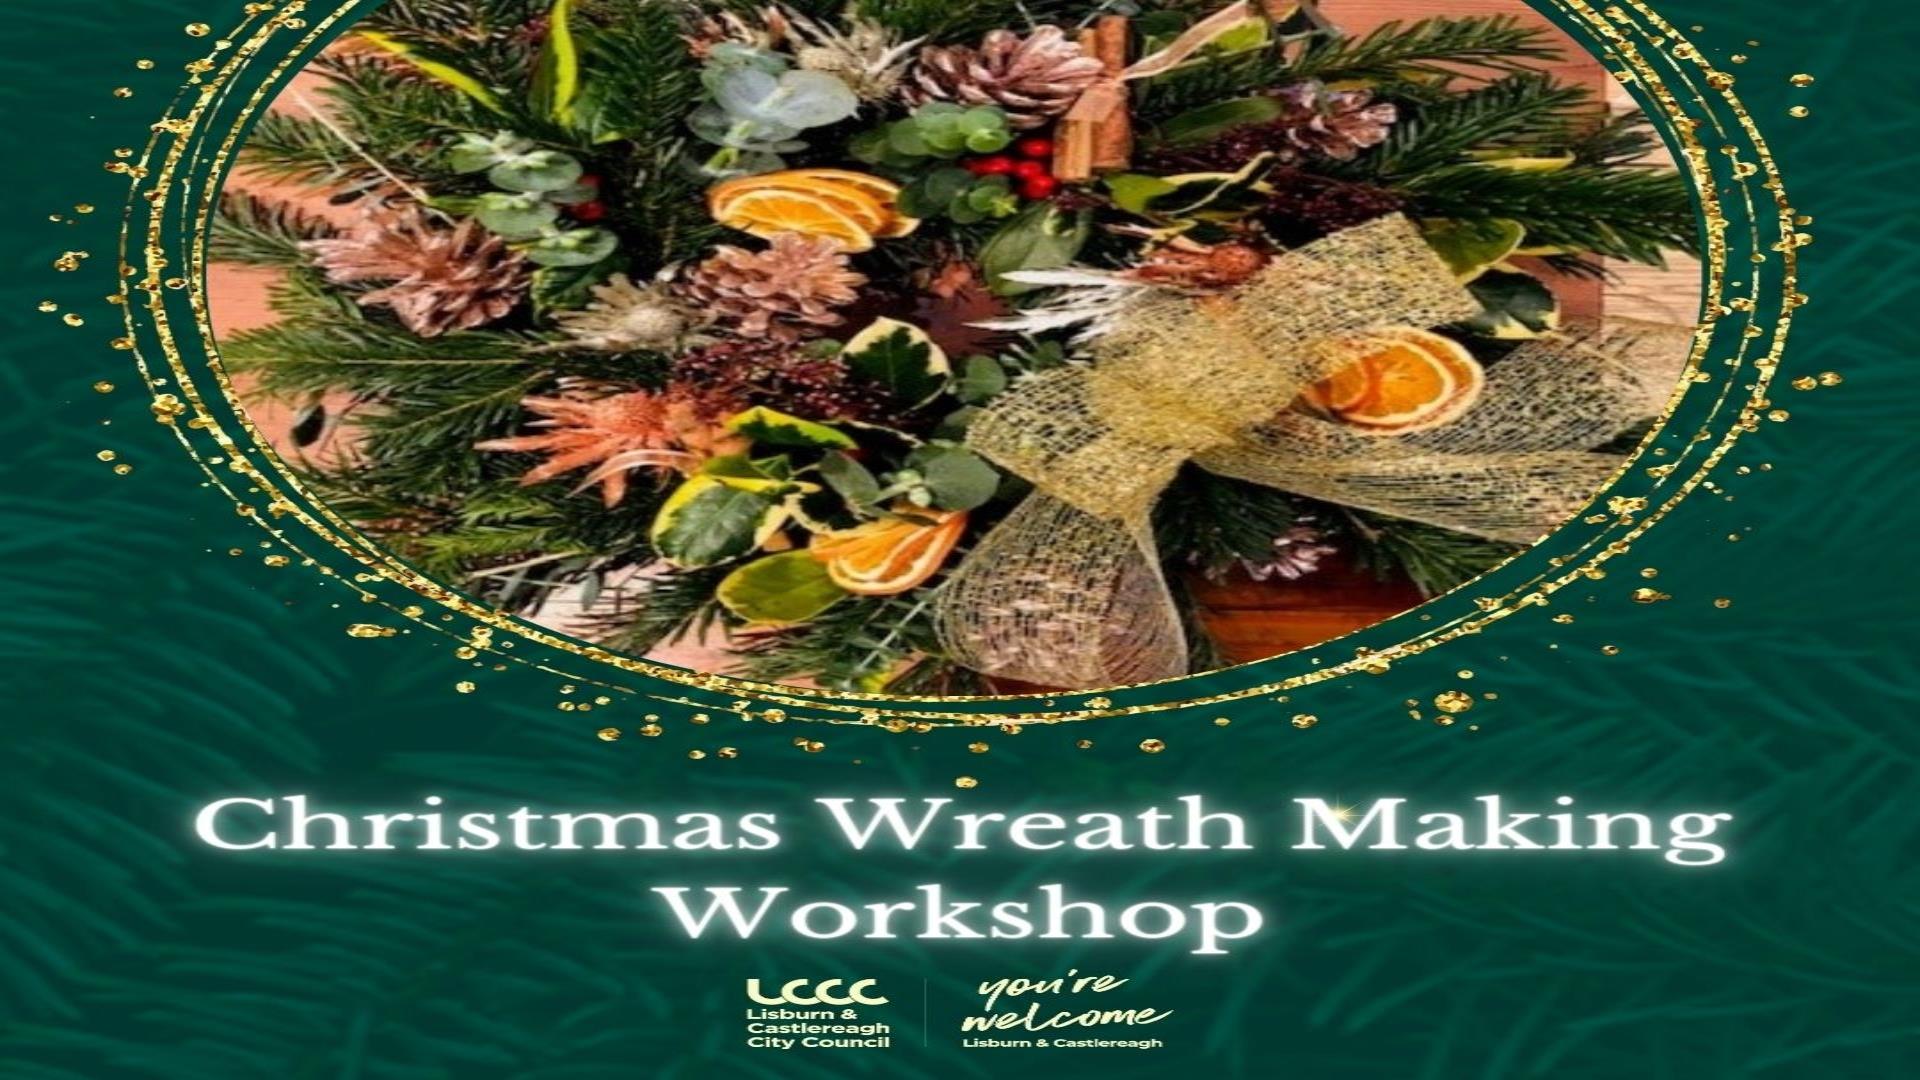 Poster for Christmas Wreath Making Workshop